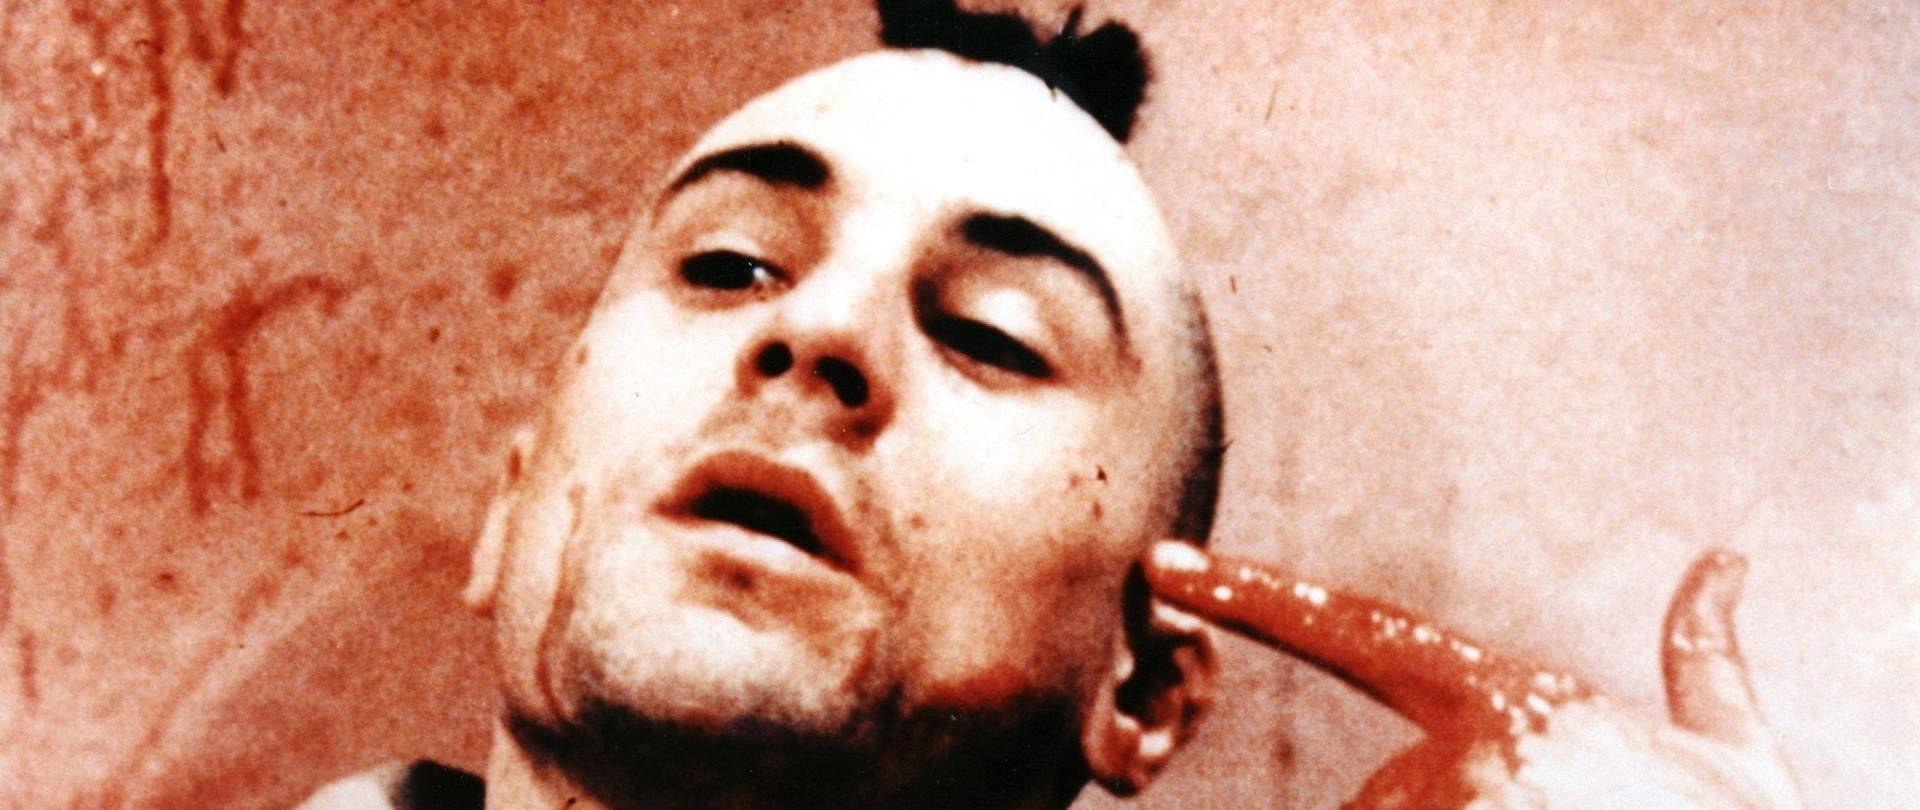 Taxi Driver Travis Bickle Character Wallpaper